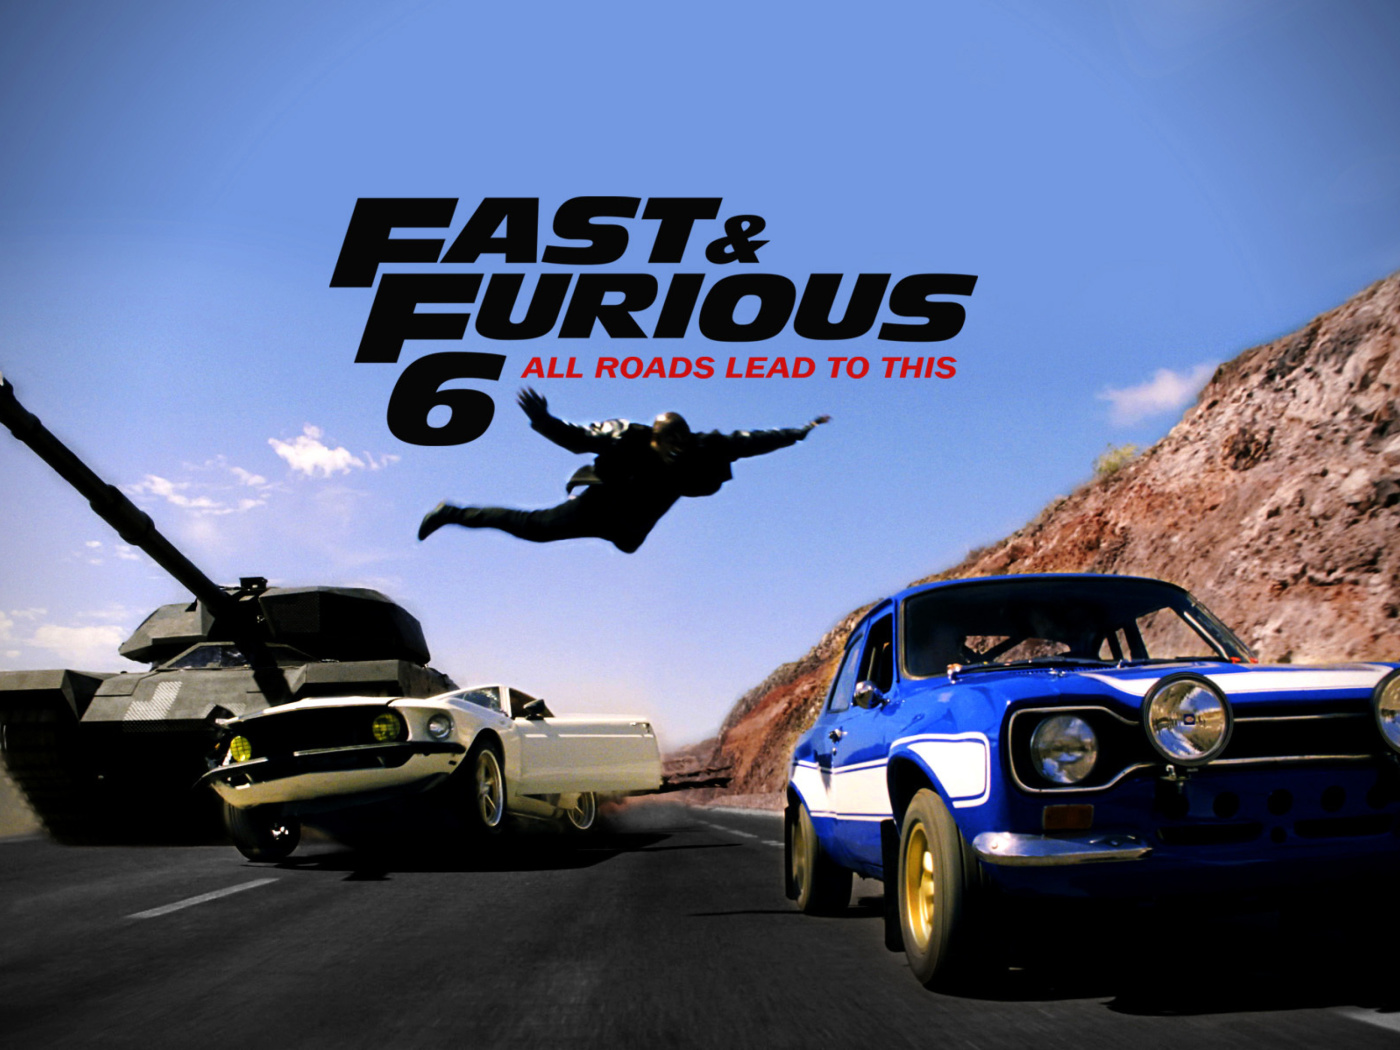 Fast and furious 6 Trailer wallpaper 1400x1050